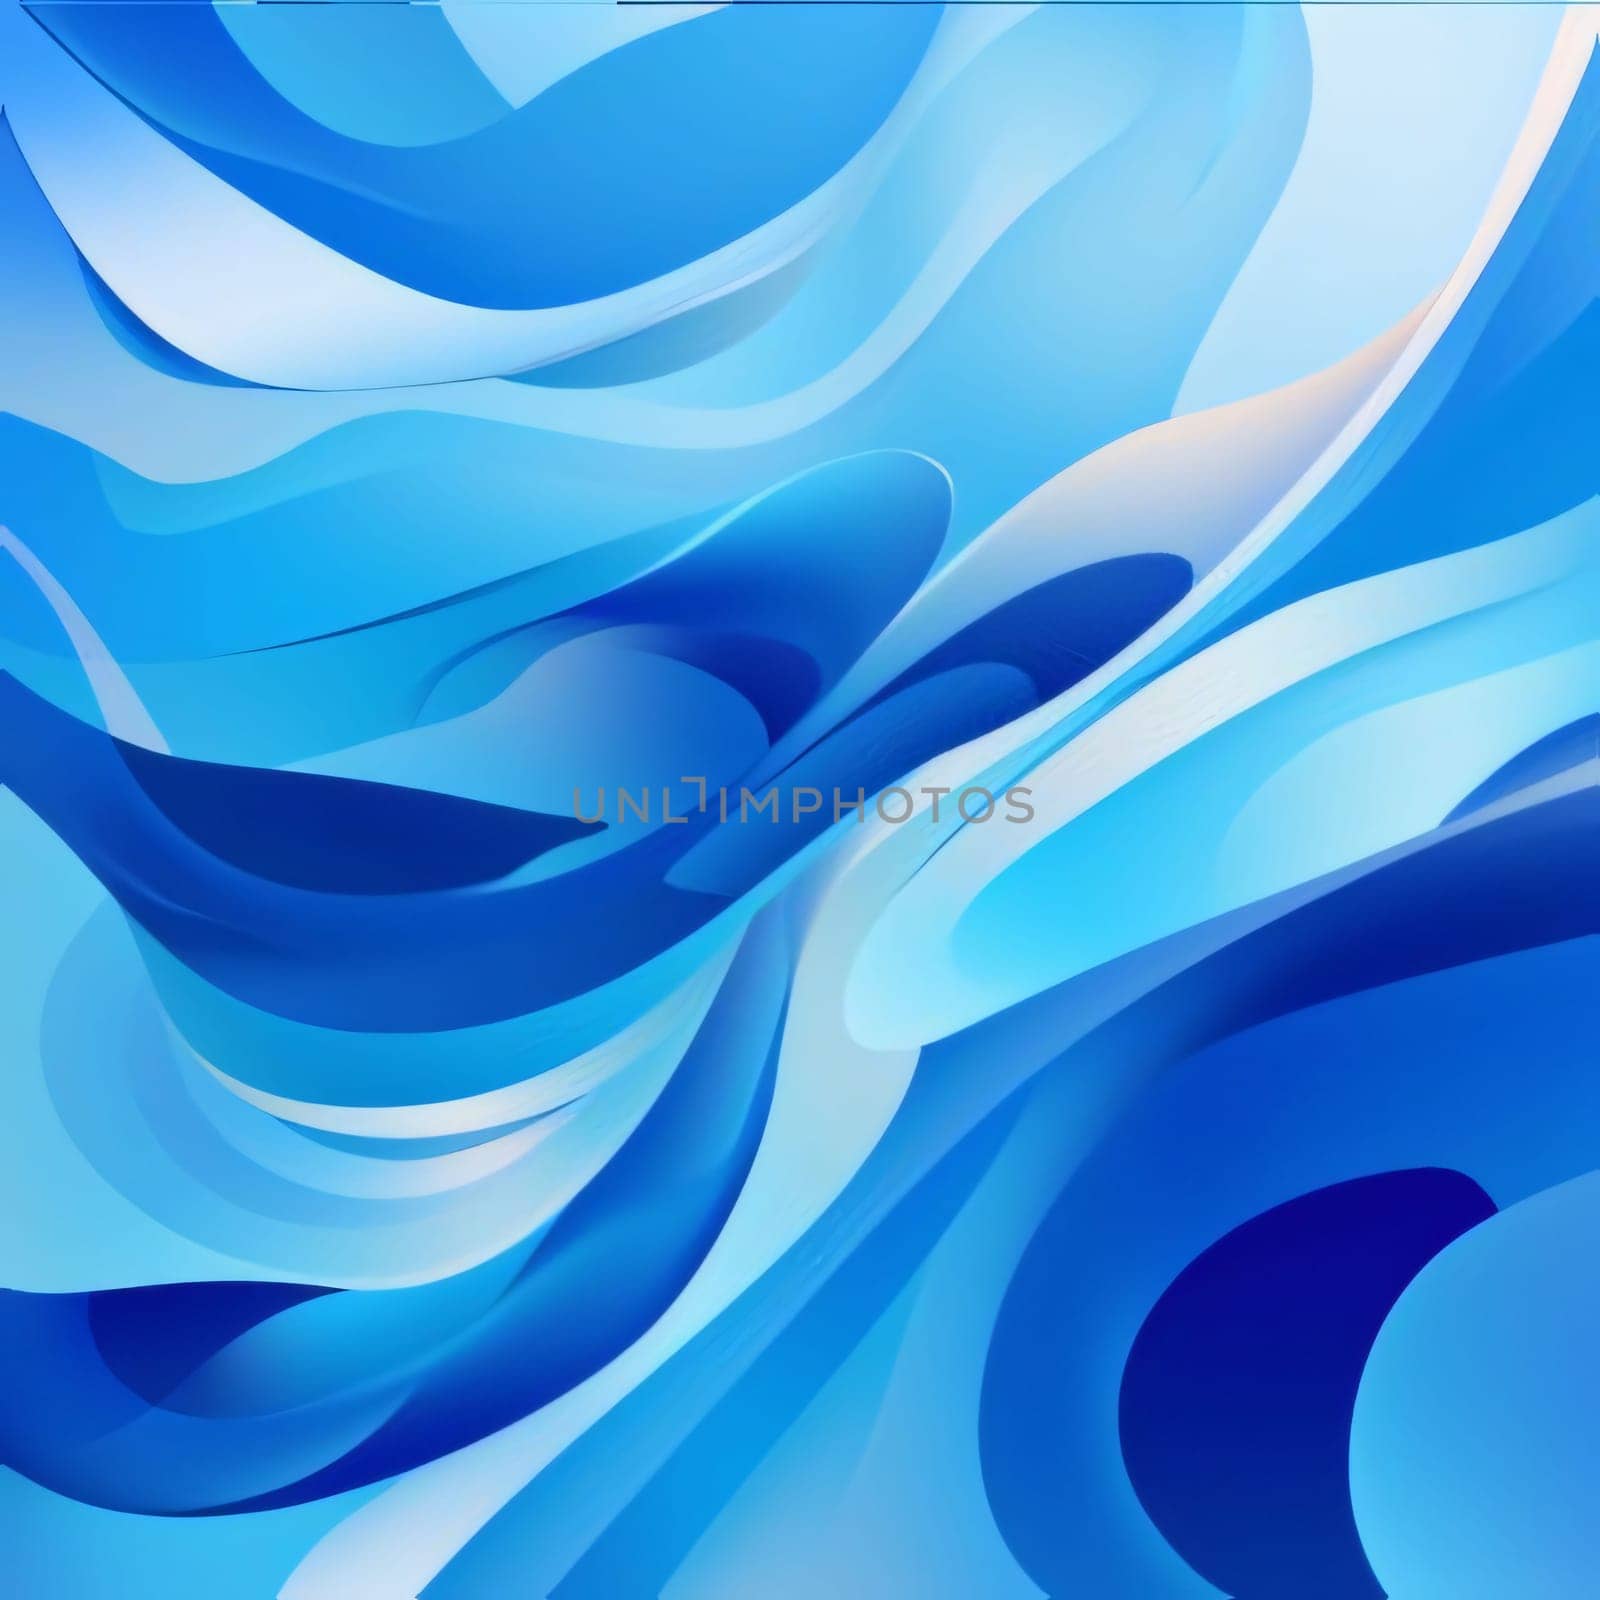 Abstract background design: Abstract blue background with wavy lines and waves. Vector illustration.